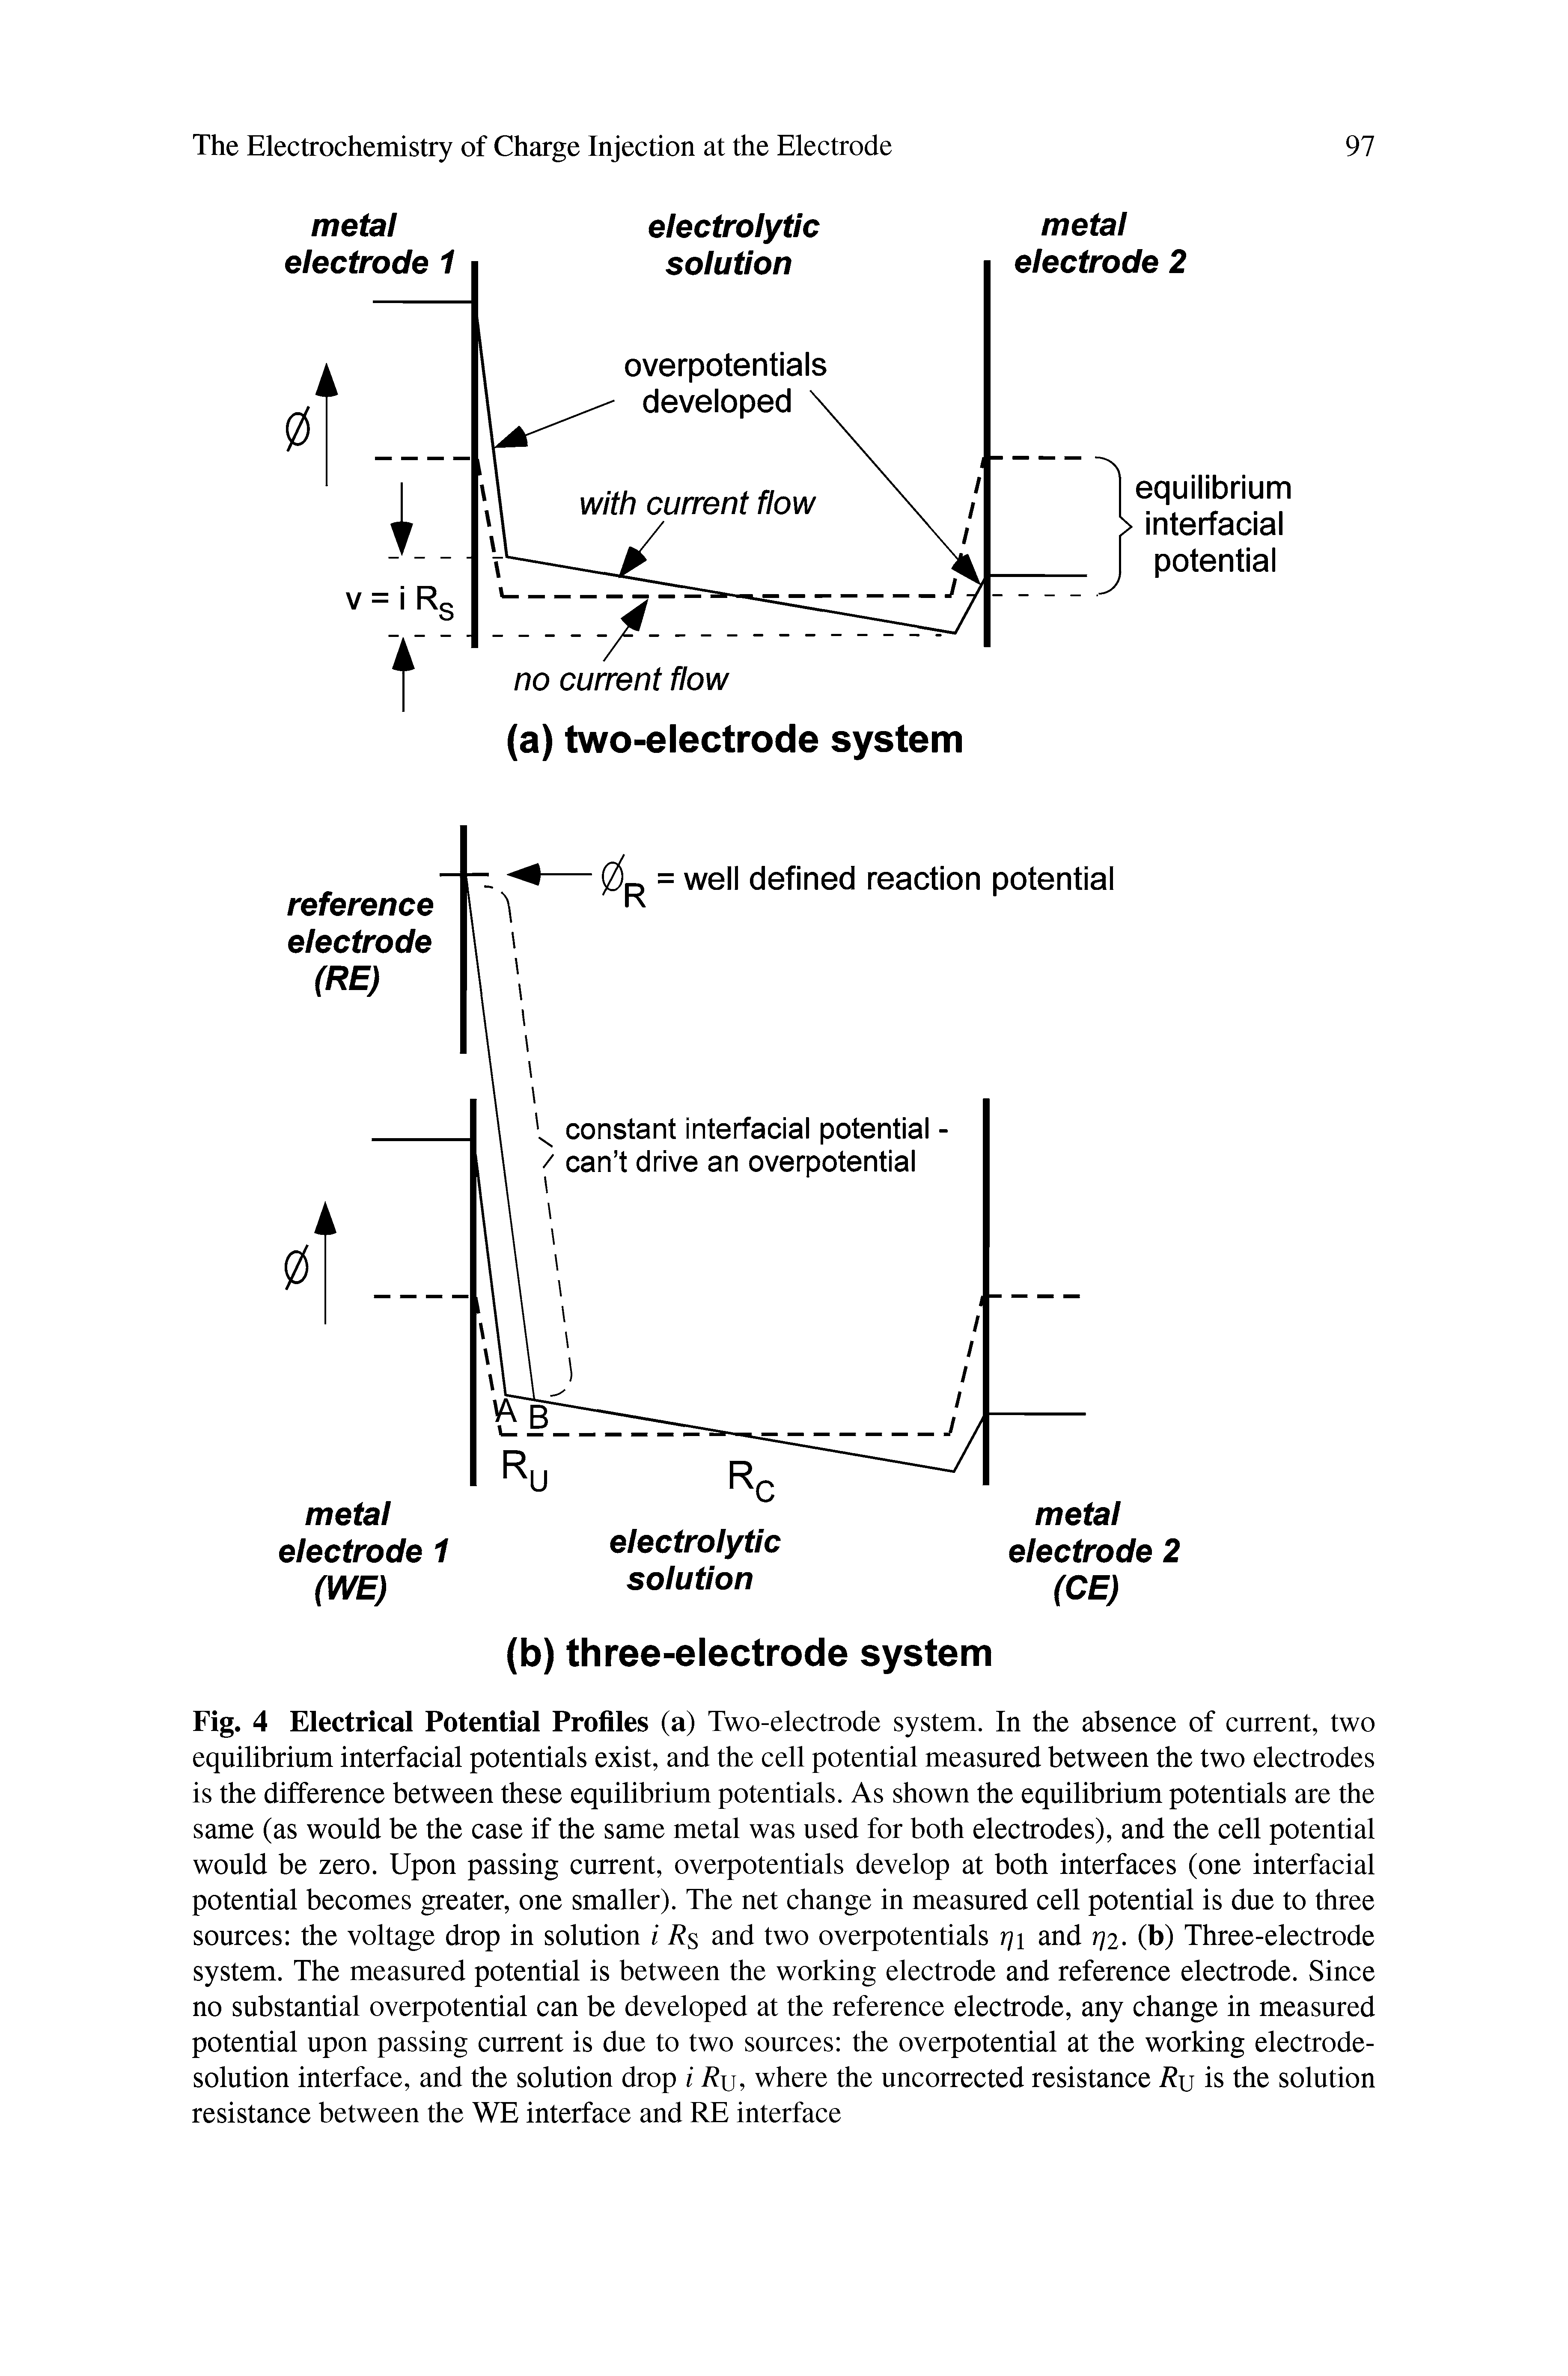 Fig. 4 Electrical Potential Profiles (a) Two-electrode system. In the absence of current, two equilibrium interfacial potentials exist, and the cell potential measured between the two electrodes is the difference between these equilibrium potentials. As shown the equilibrium potentials are the same (as would be the case if the same metal was used for both electrodes), and the cell potential would be zero. Upon passing current, overpotentials develop at both interfaces (one interfacial potential becomes greater, one smaller). The net change in measured cell potential is due to three sources the voltage drop in solution i Rs and two overpotentials rji and r]2- (b) Three-electrode system. The measured potential is between the working electrode and reference electrode. Since no substantial overpotential can be developed at the reference electrode, any change in measured potential upon passing current is due to two sources the overpotential at the working electrodesolution interface, and the solution drop i Rjj, where the uncorrected resistance Rjj is the solution resistance between the WE interface and RE interface...